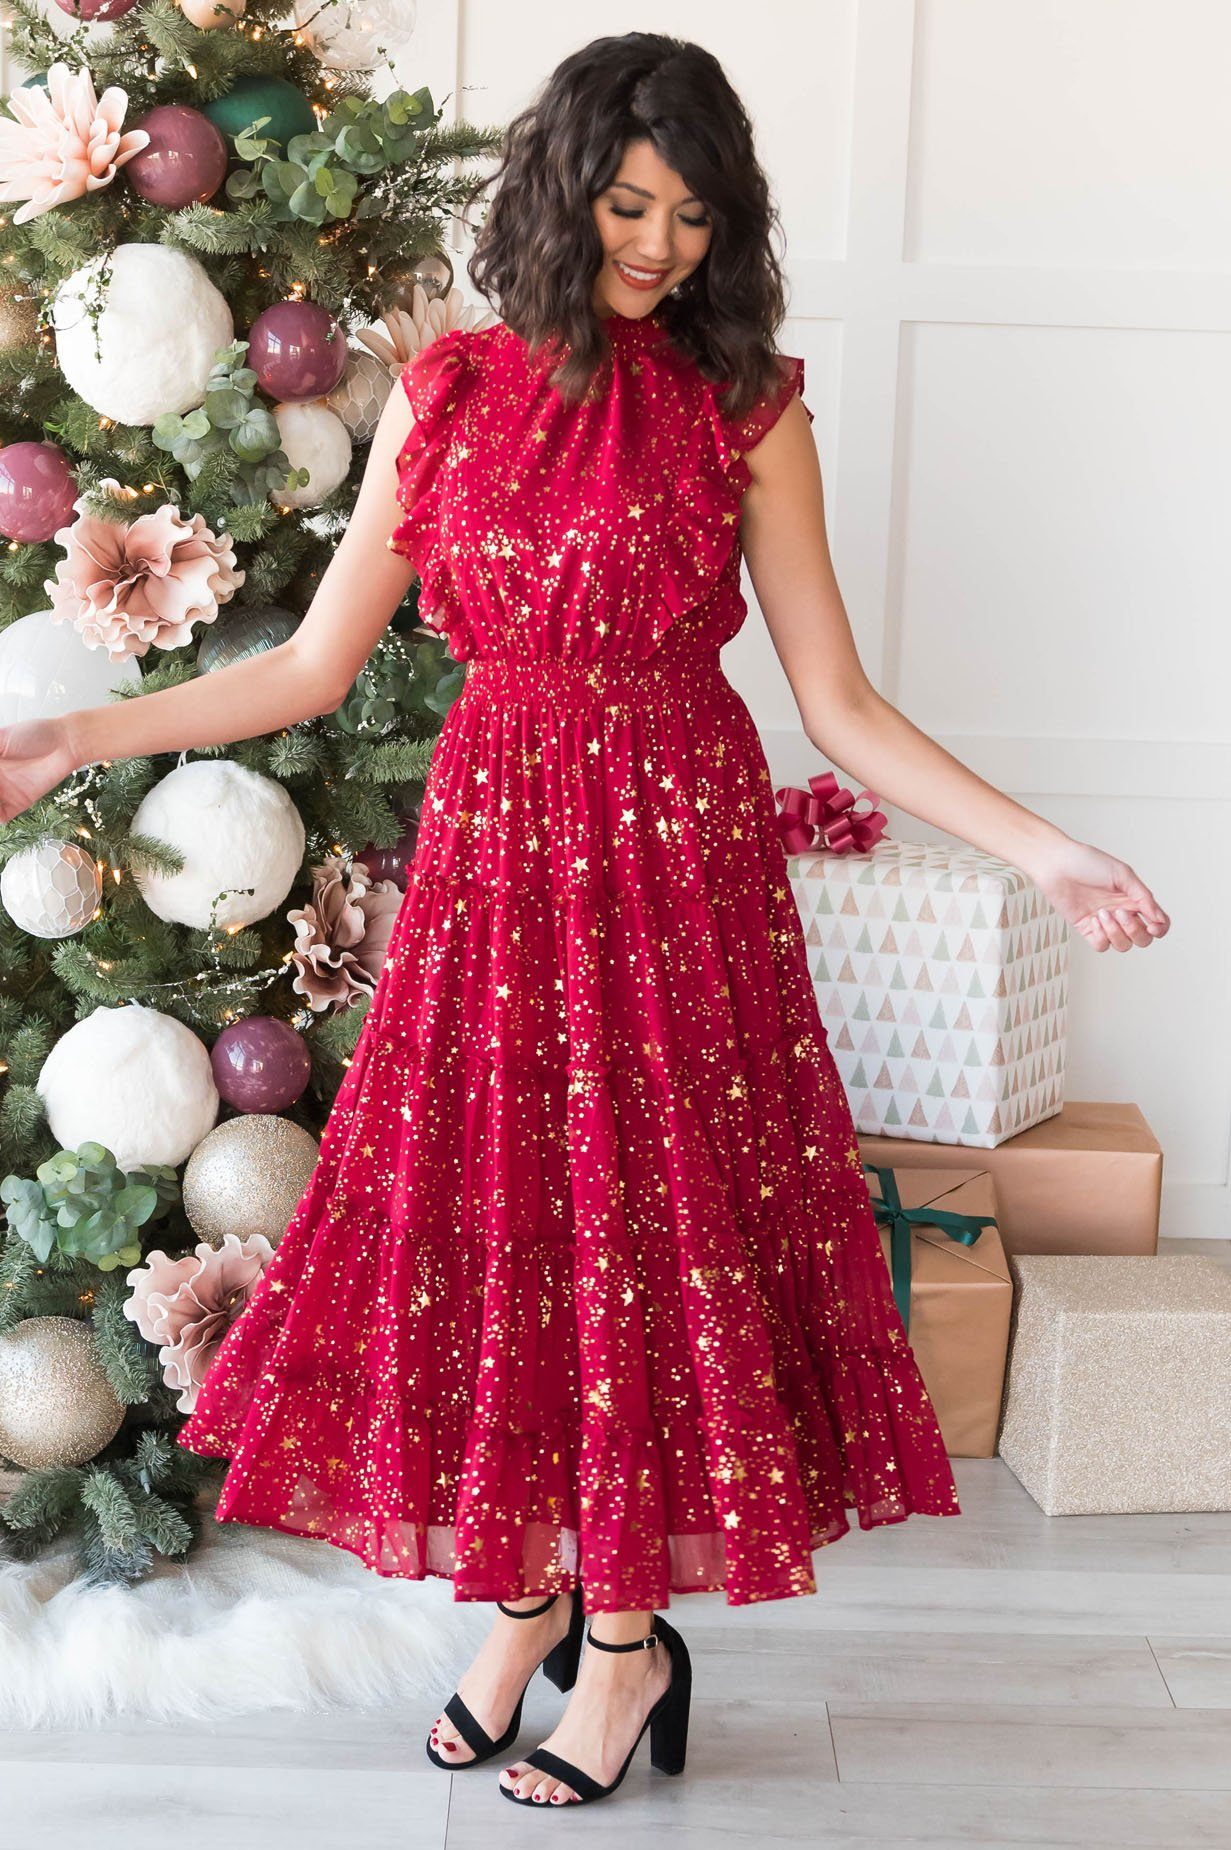 The Star Modest Holiday Dance Dress - NeeSee's Dresses